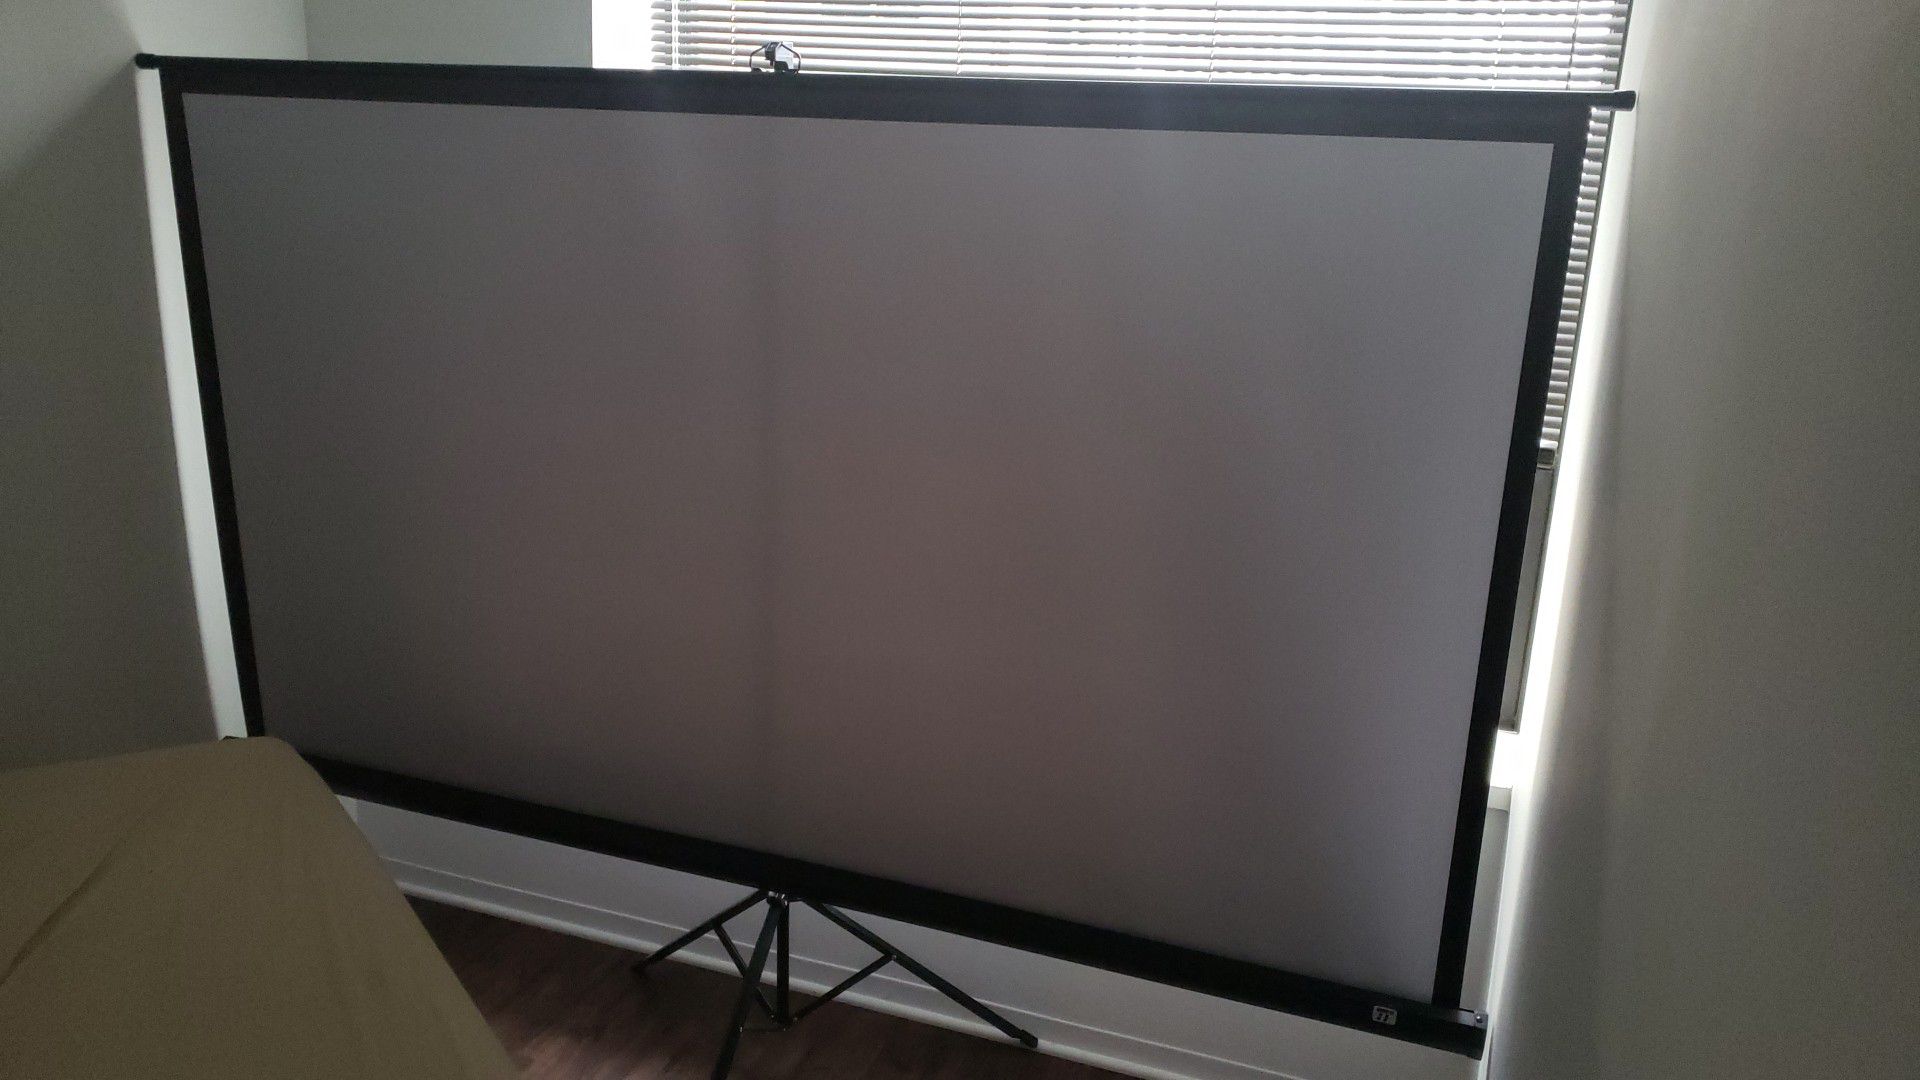 Screen for the projector